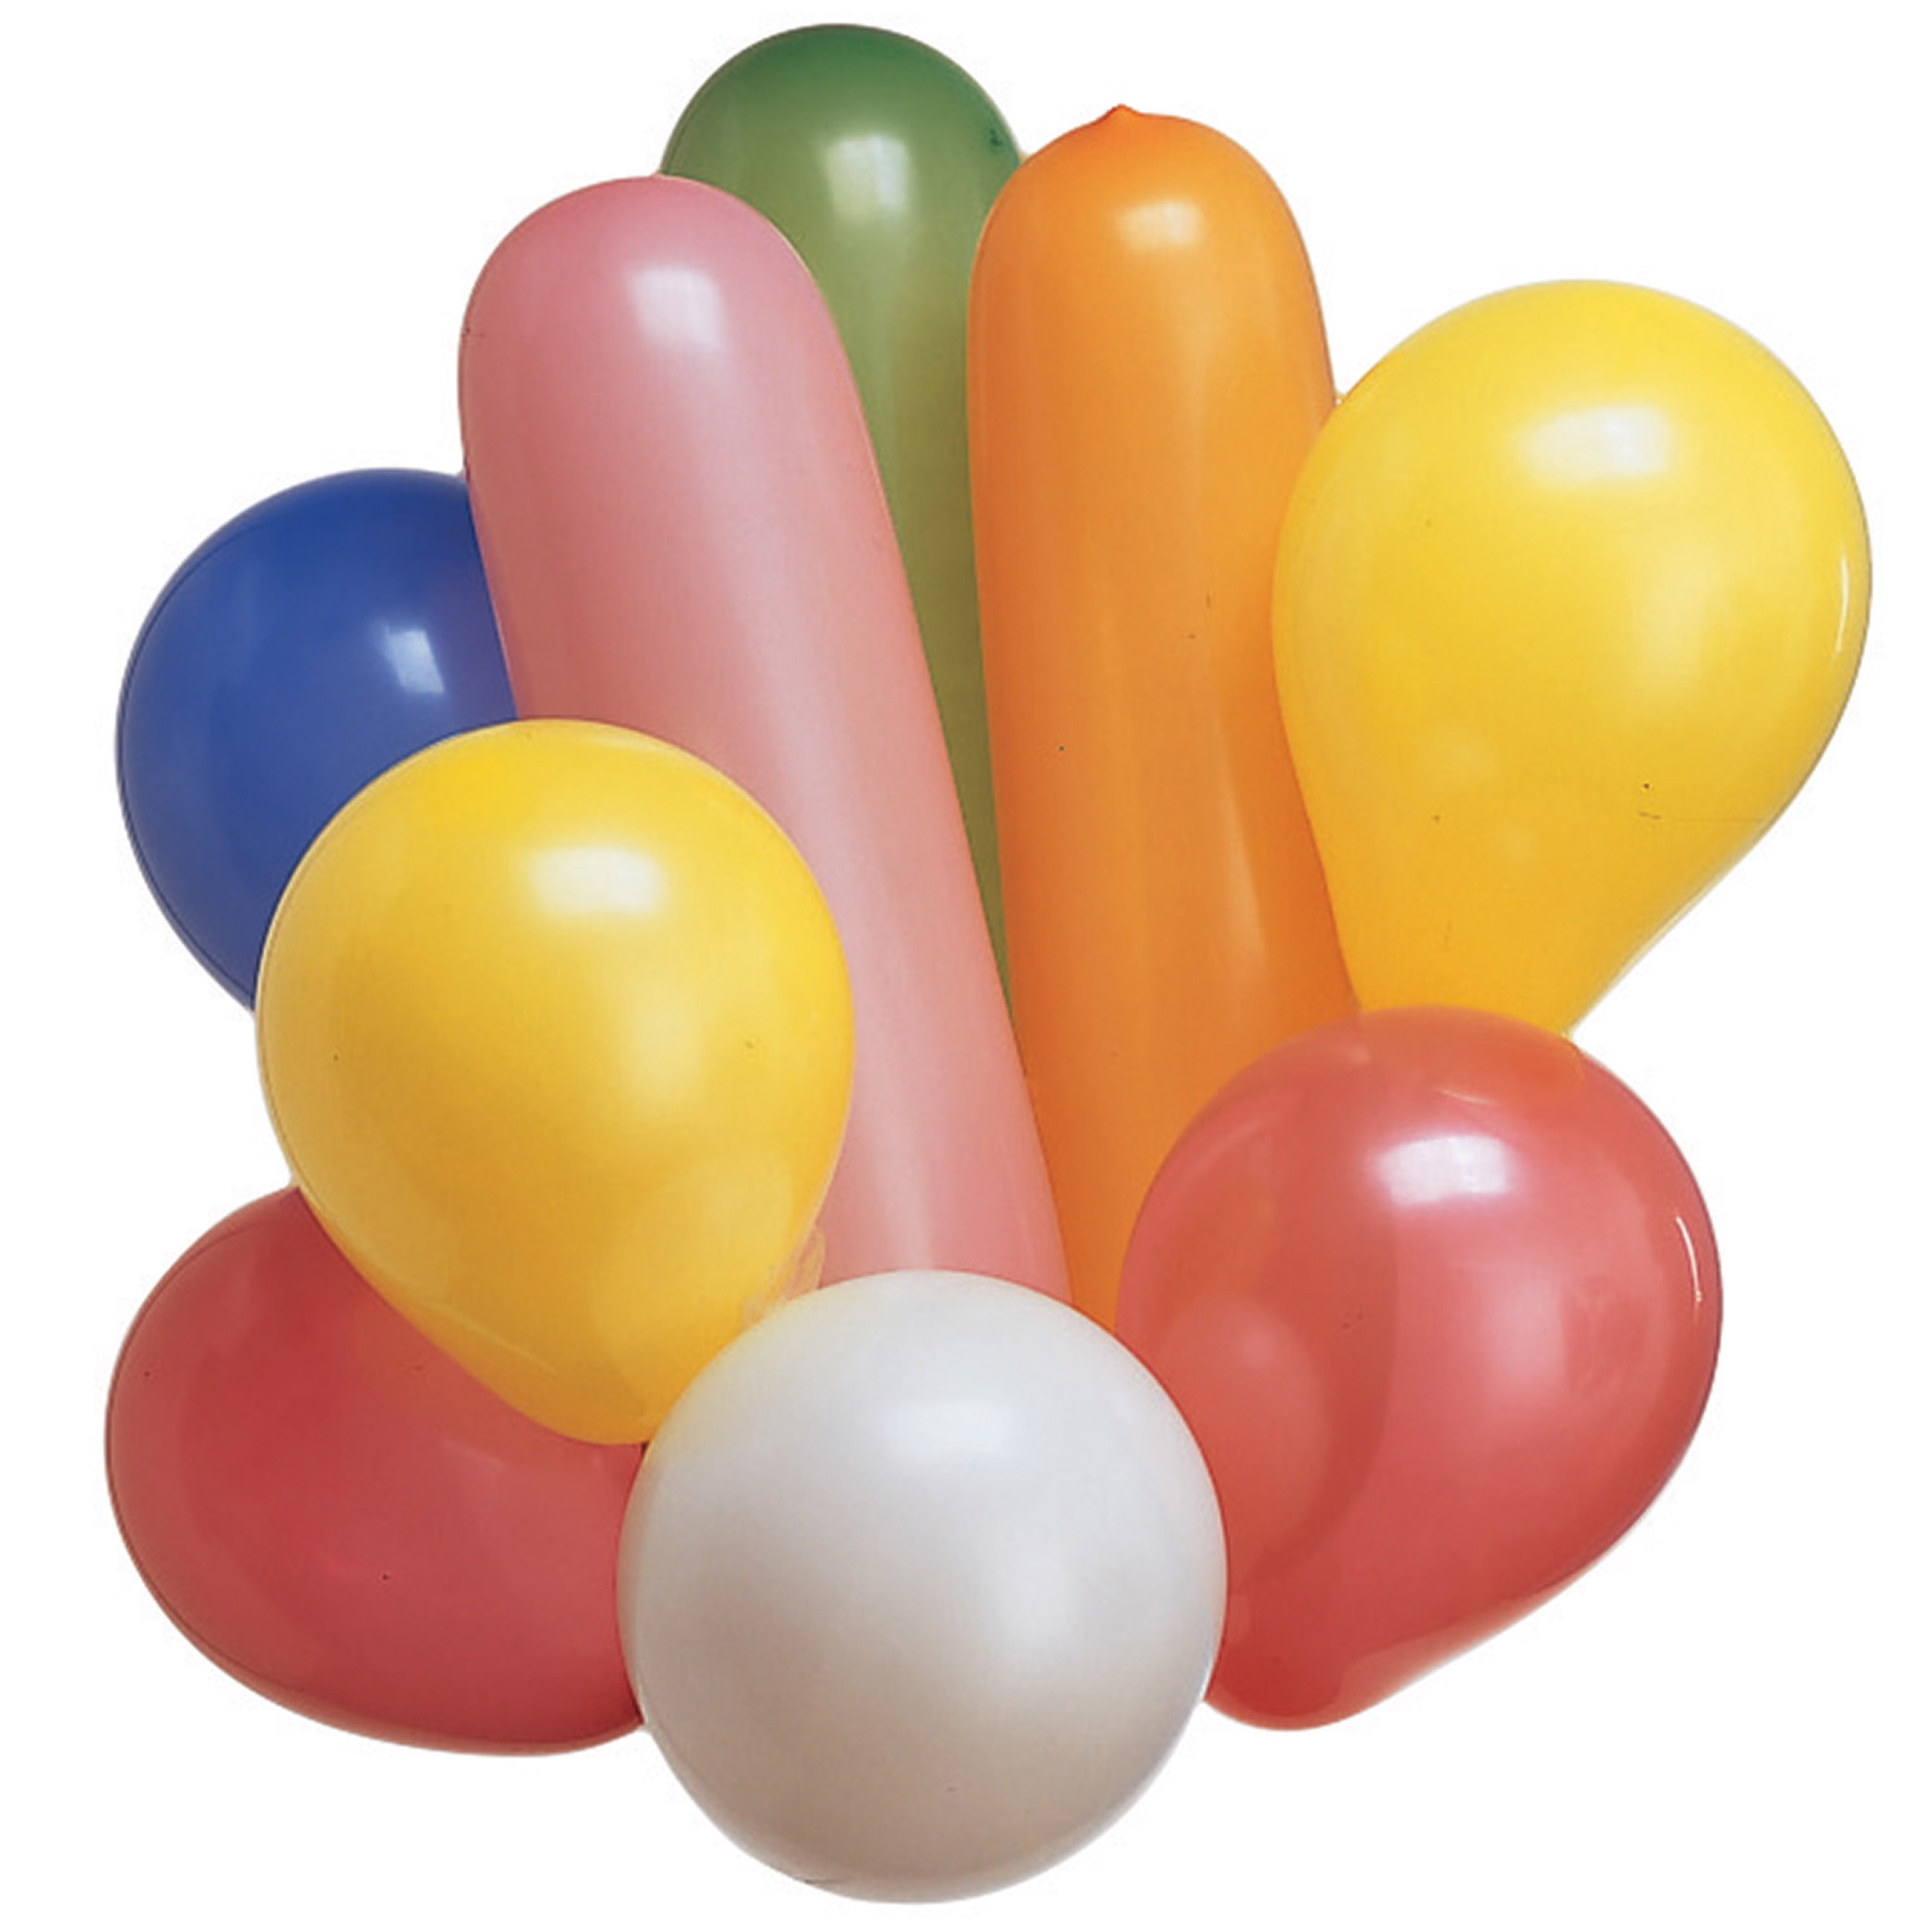 Hand Pump Party Balloons Assorted Bright Colors Ea pkg contains 50 Lot Of 2 